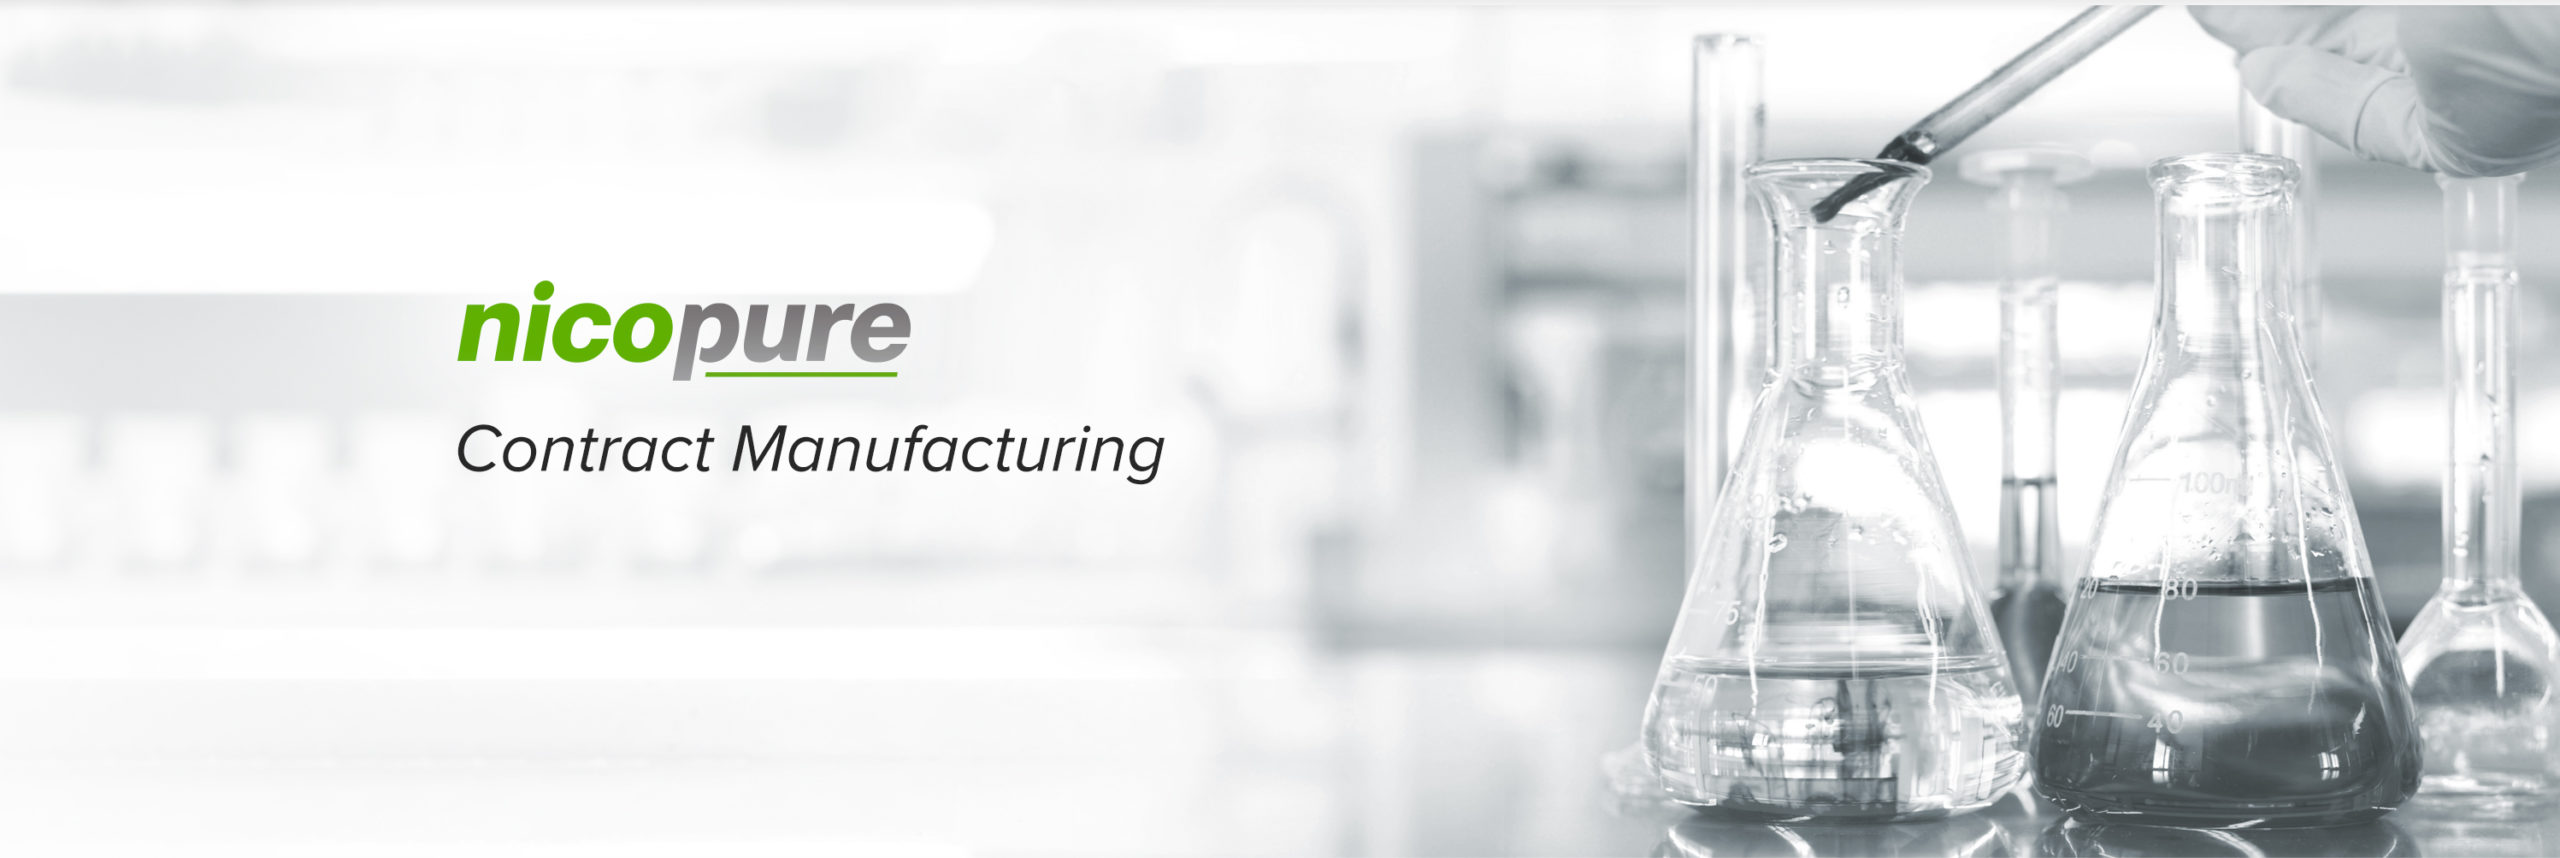 Nicopure Contract Manufacturing